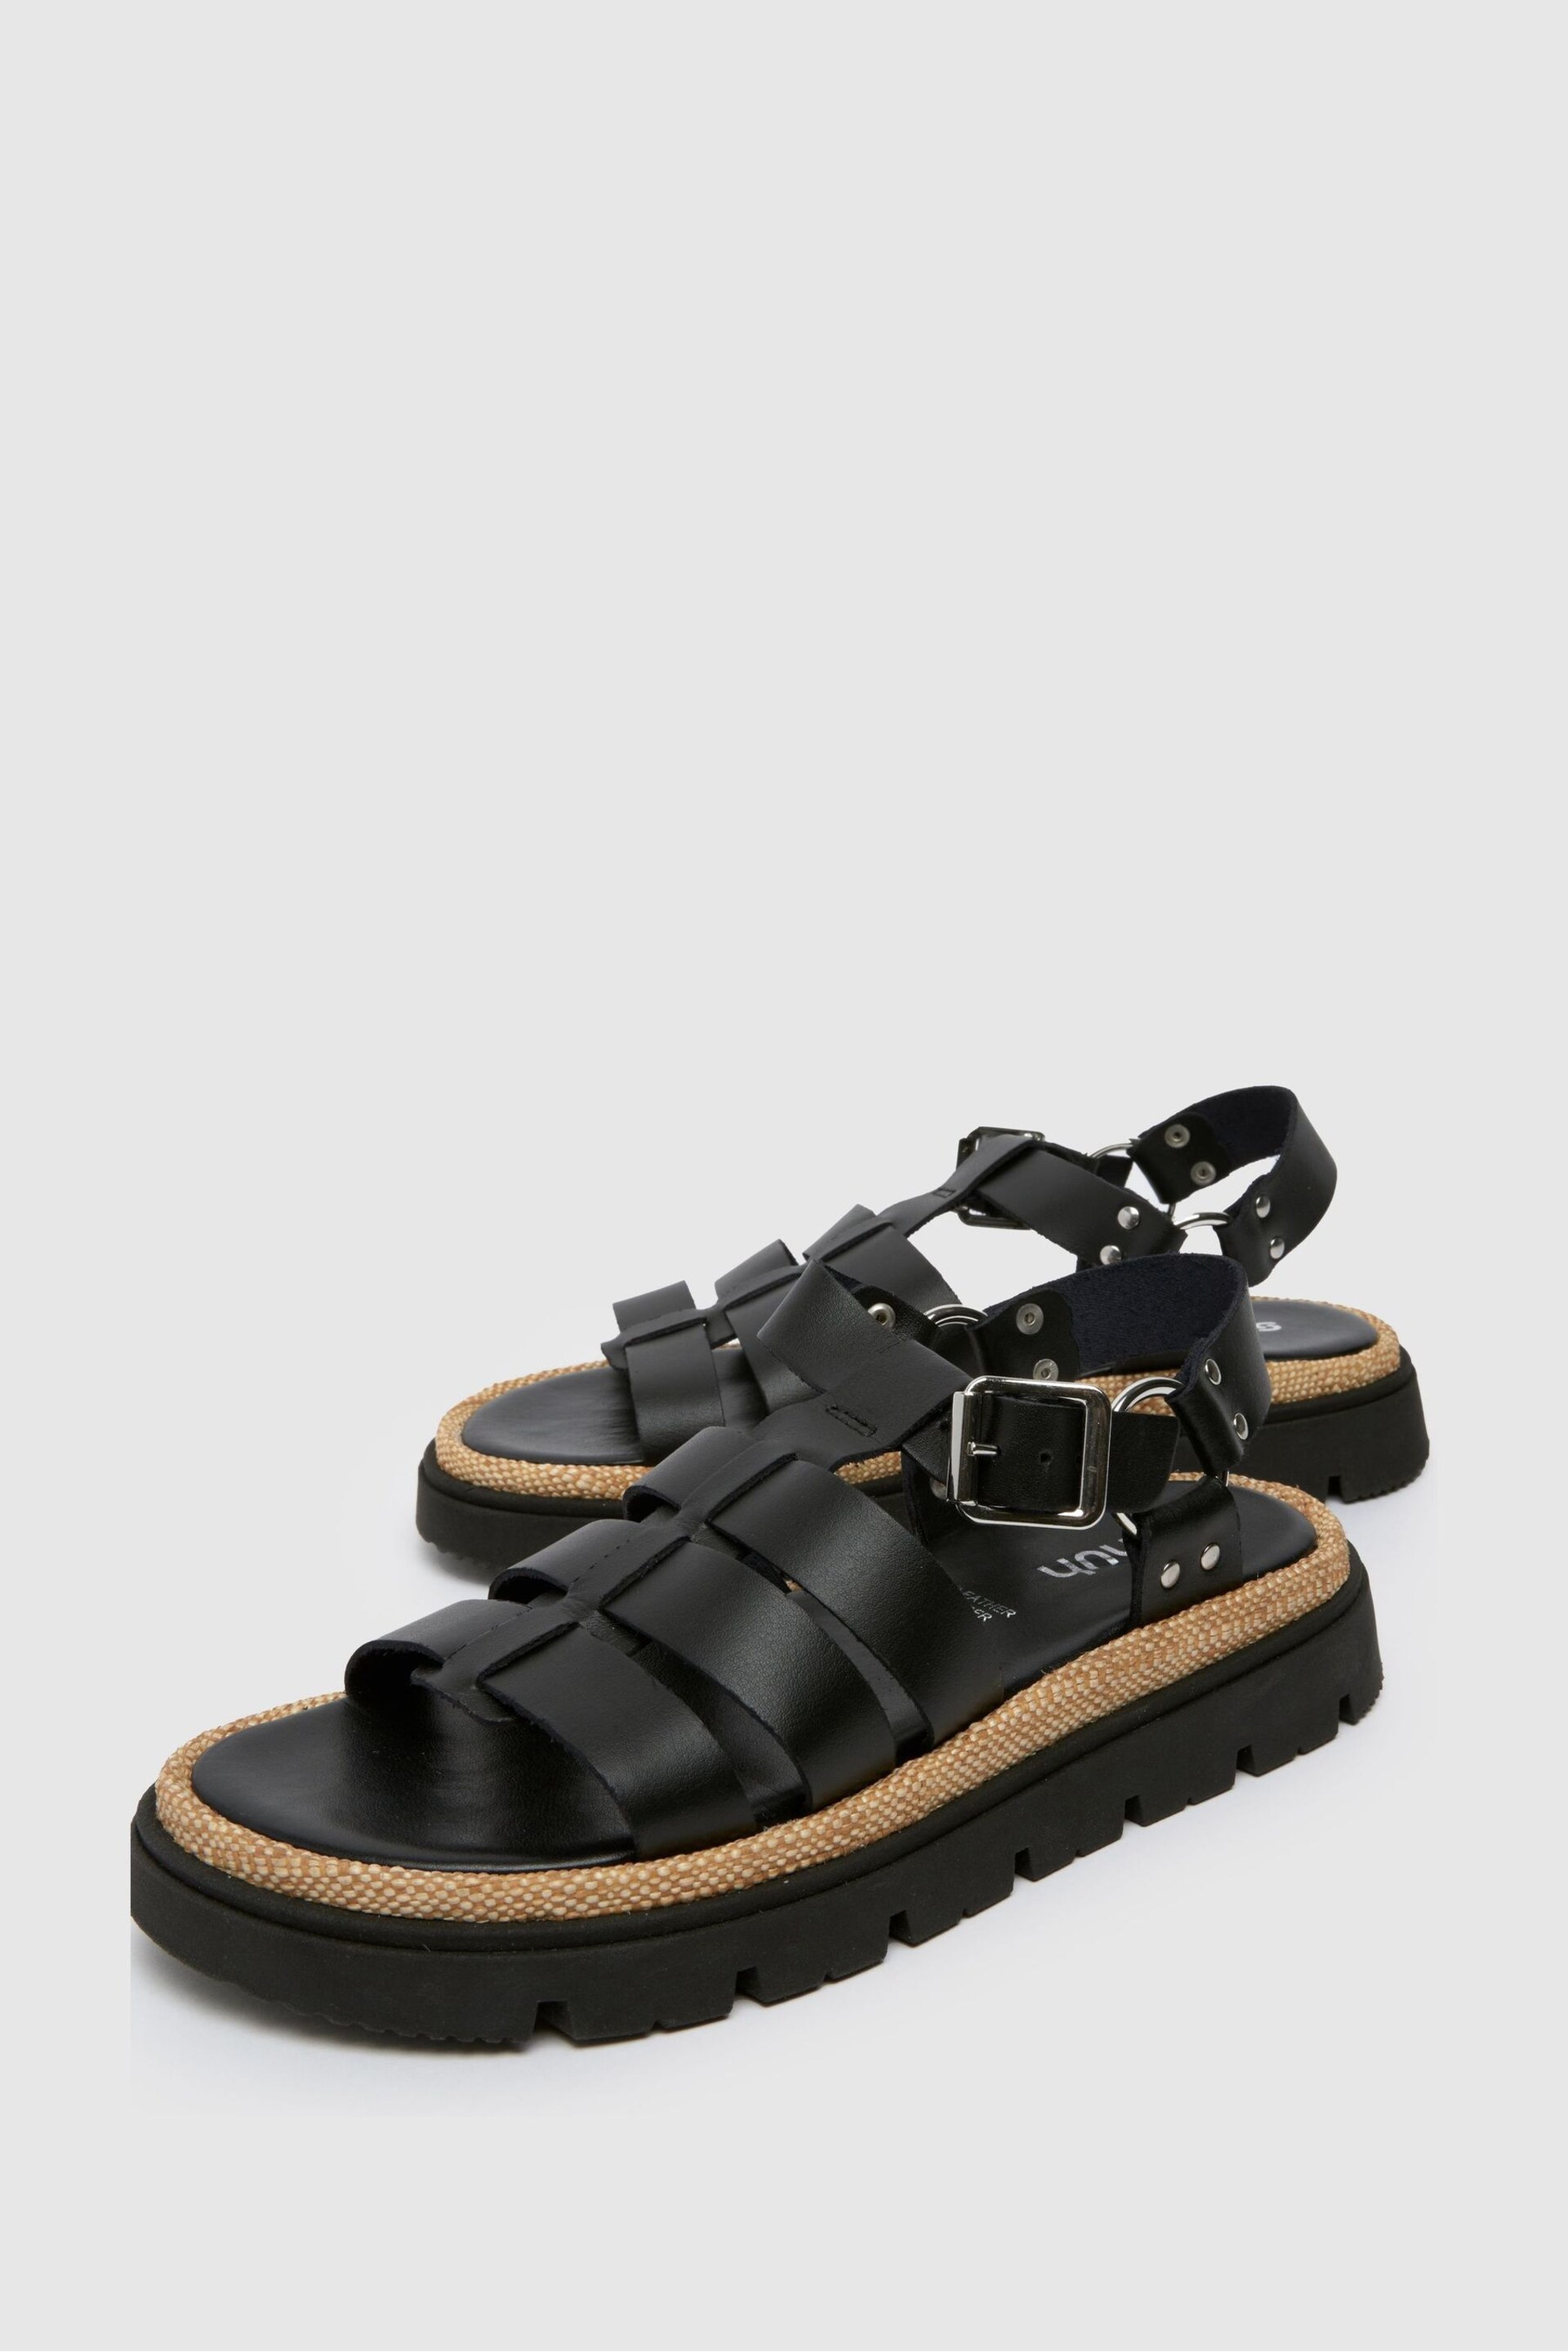 Schuh Texas Leather Gladiator Black Sandals - Image 4 of 4